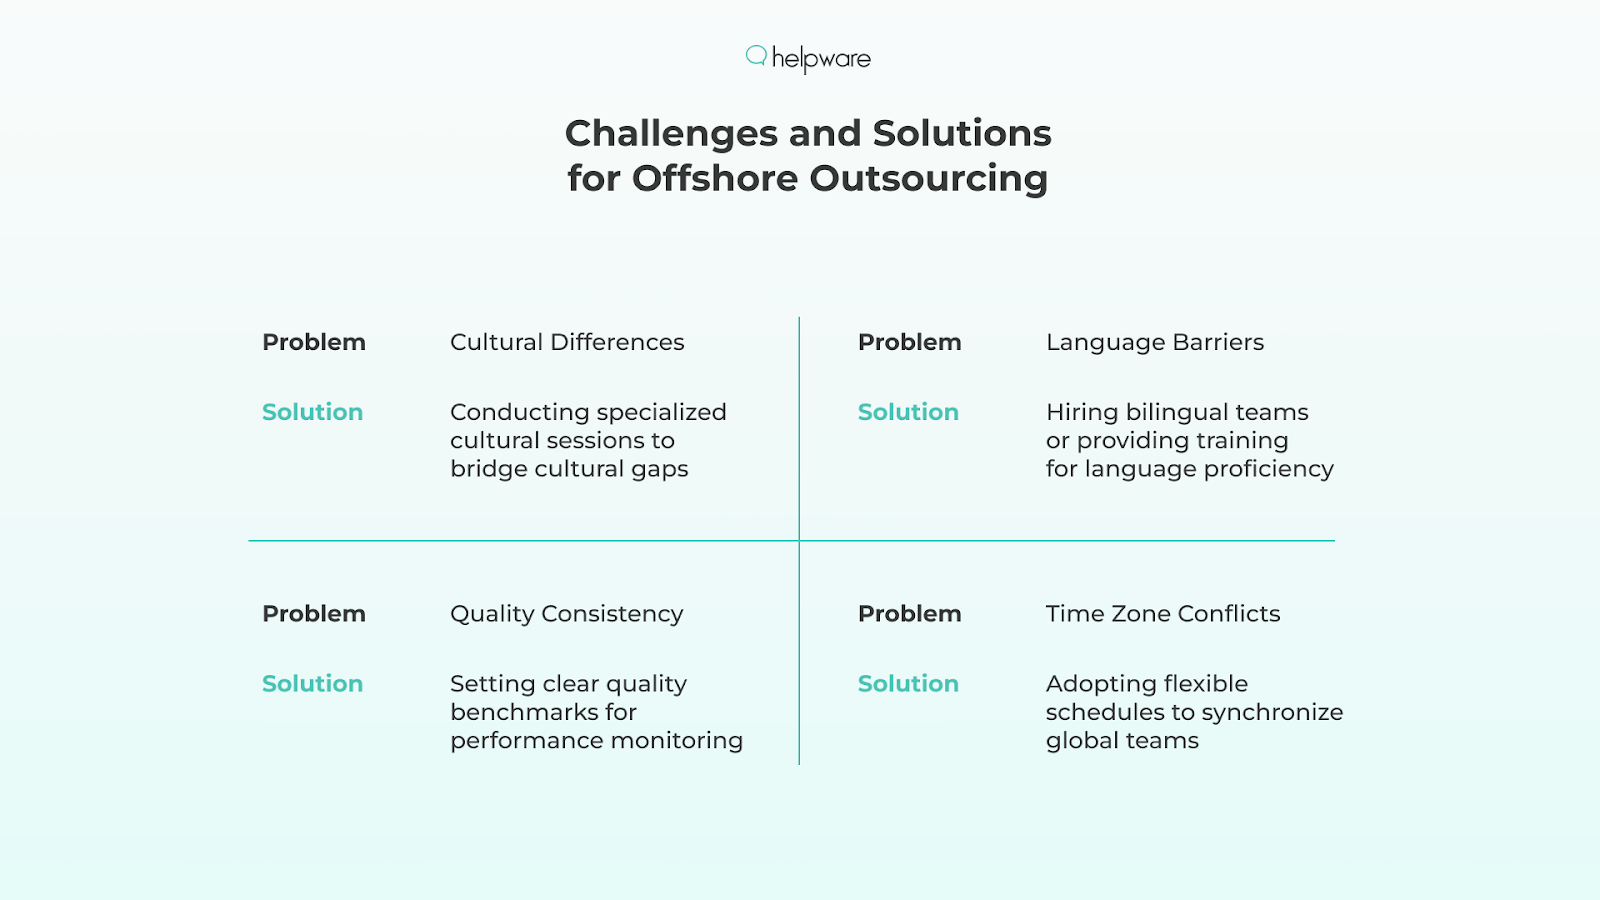 Challenges and Solutions for Offshore Outsourcing